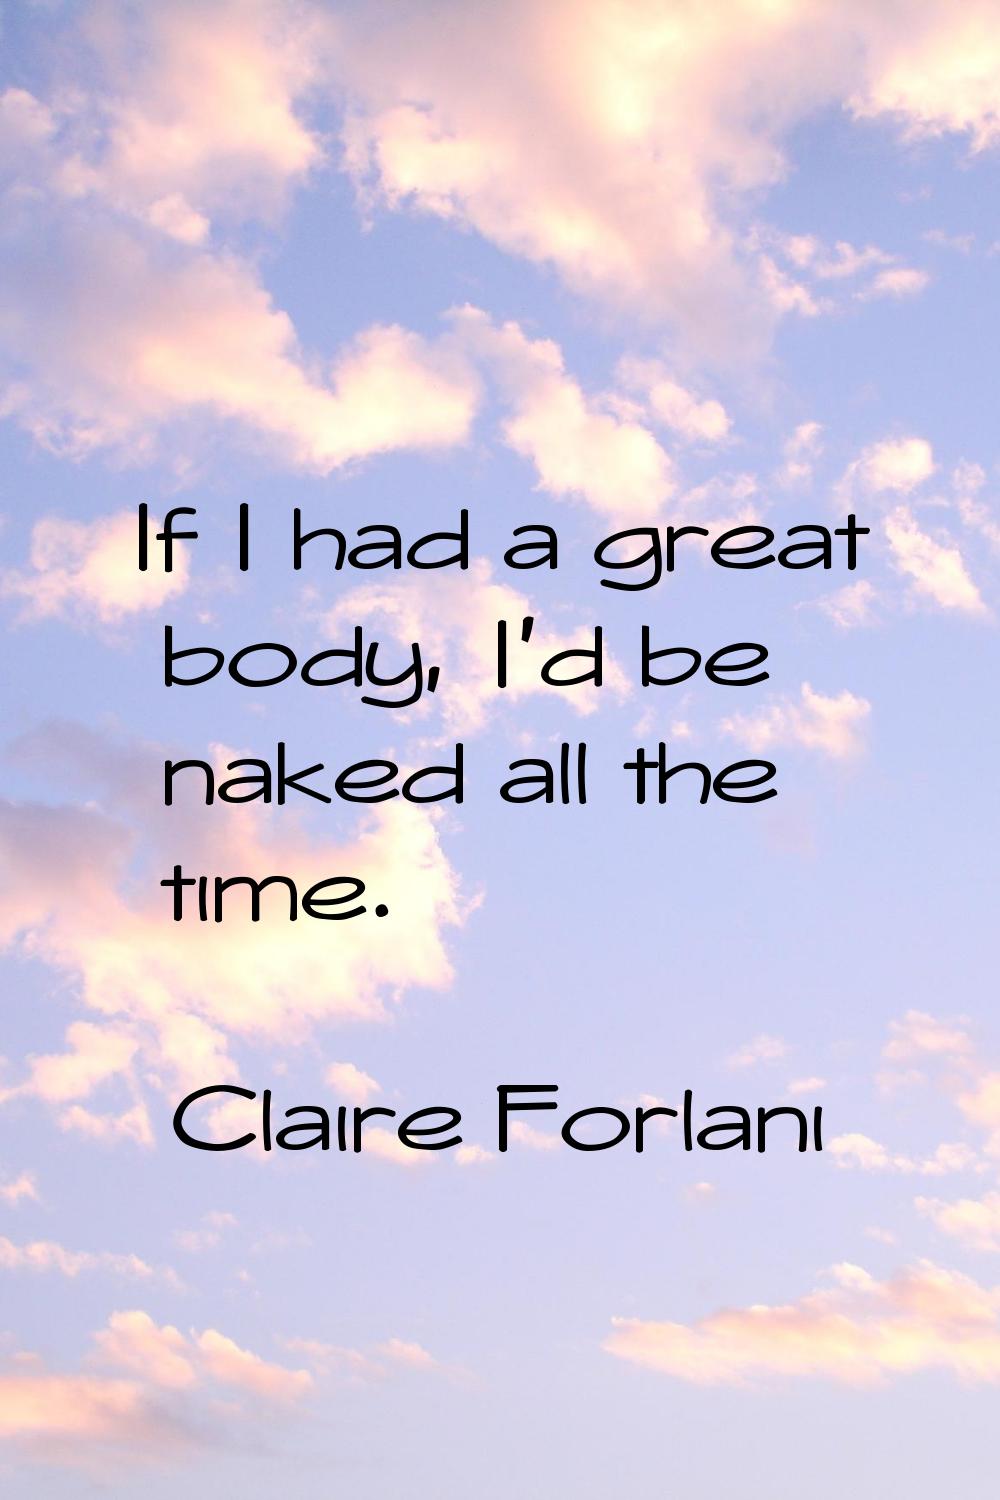 If I had a great body, I'd be naked all the time.